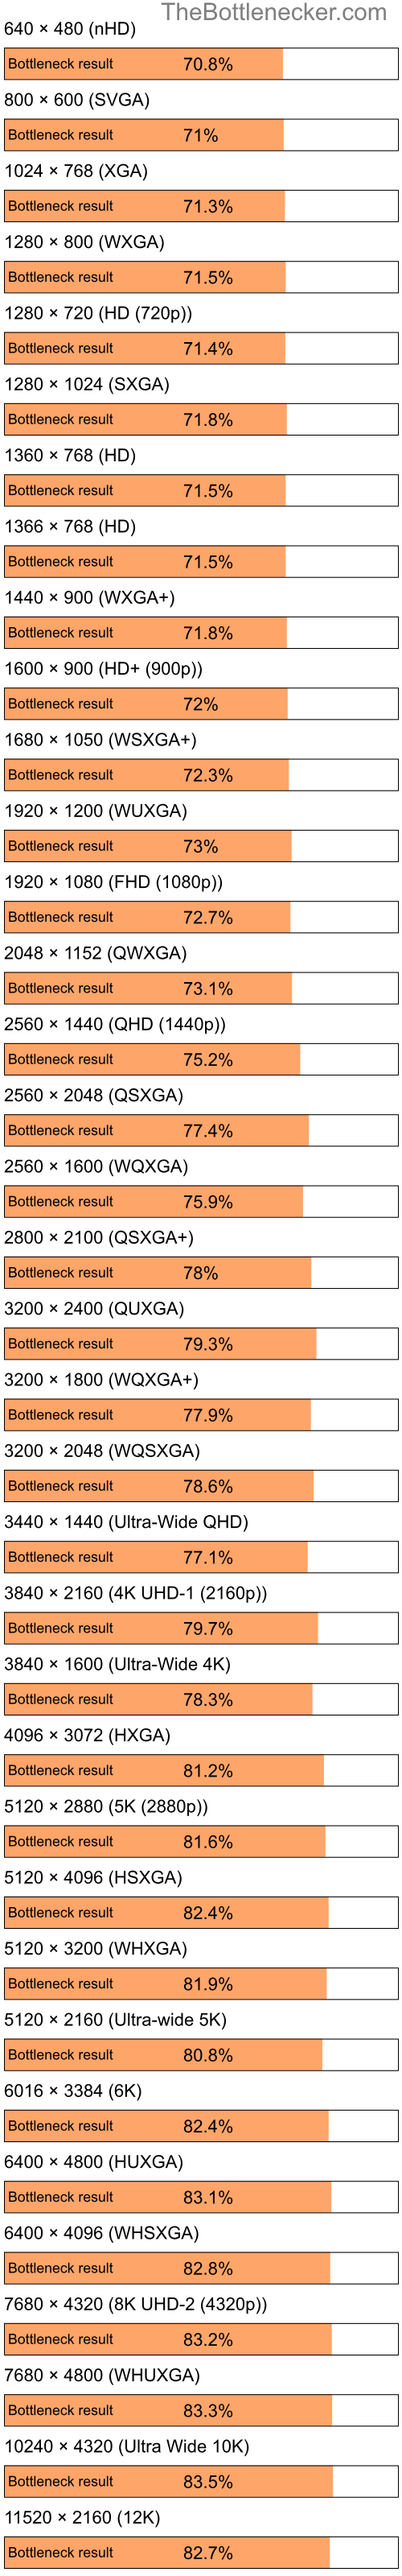 Bottleneck results by resolution for Intel Celeron M 410 and AMD Mobility Radeon HD 3450 in Graphic Card Intense Tasks